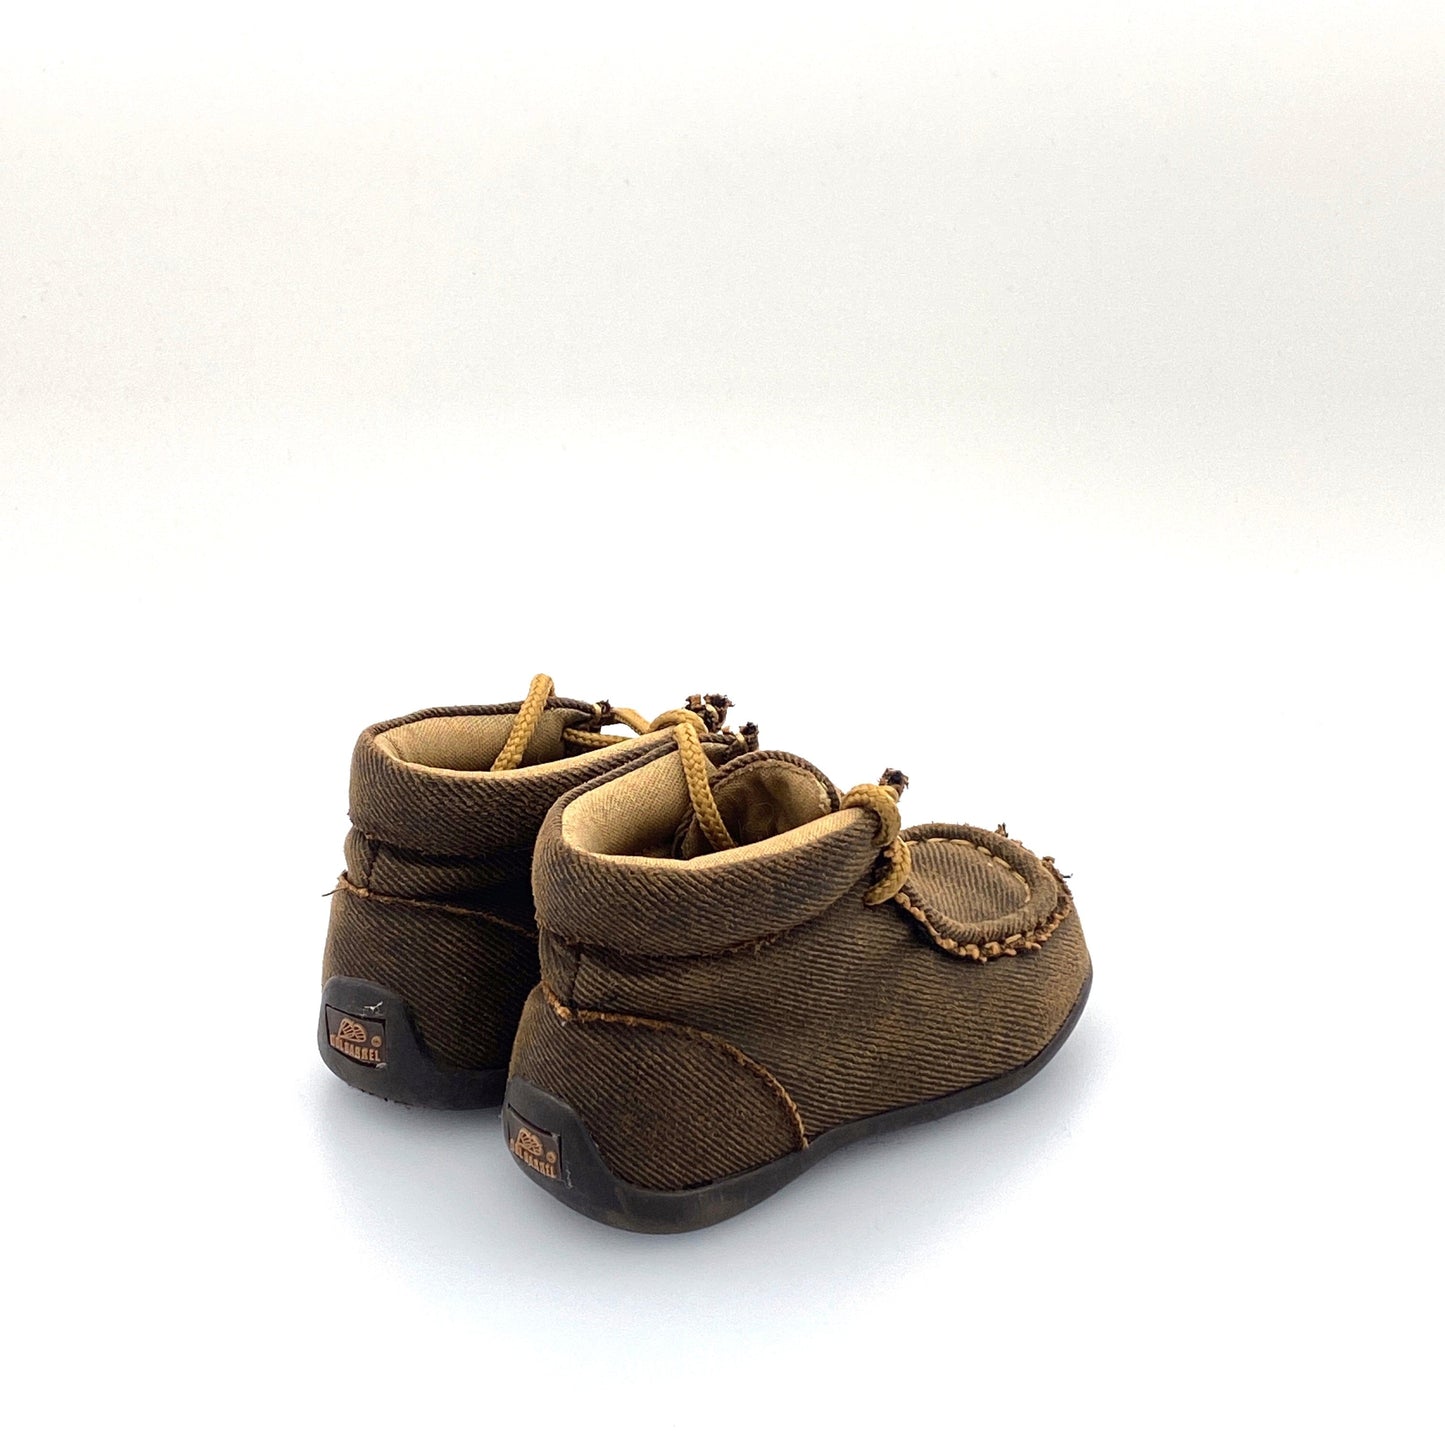 DBL Double Barrel Toddler Boys Size 4 Gavin Moccasins Boots